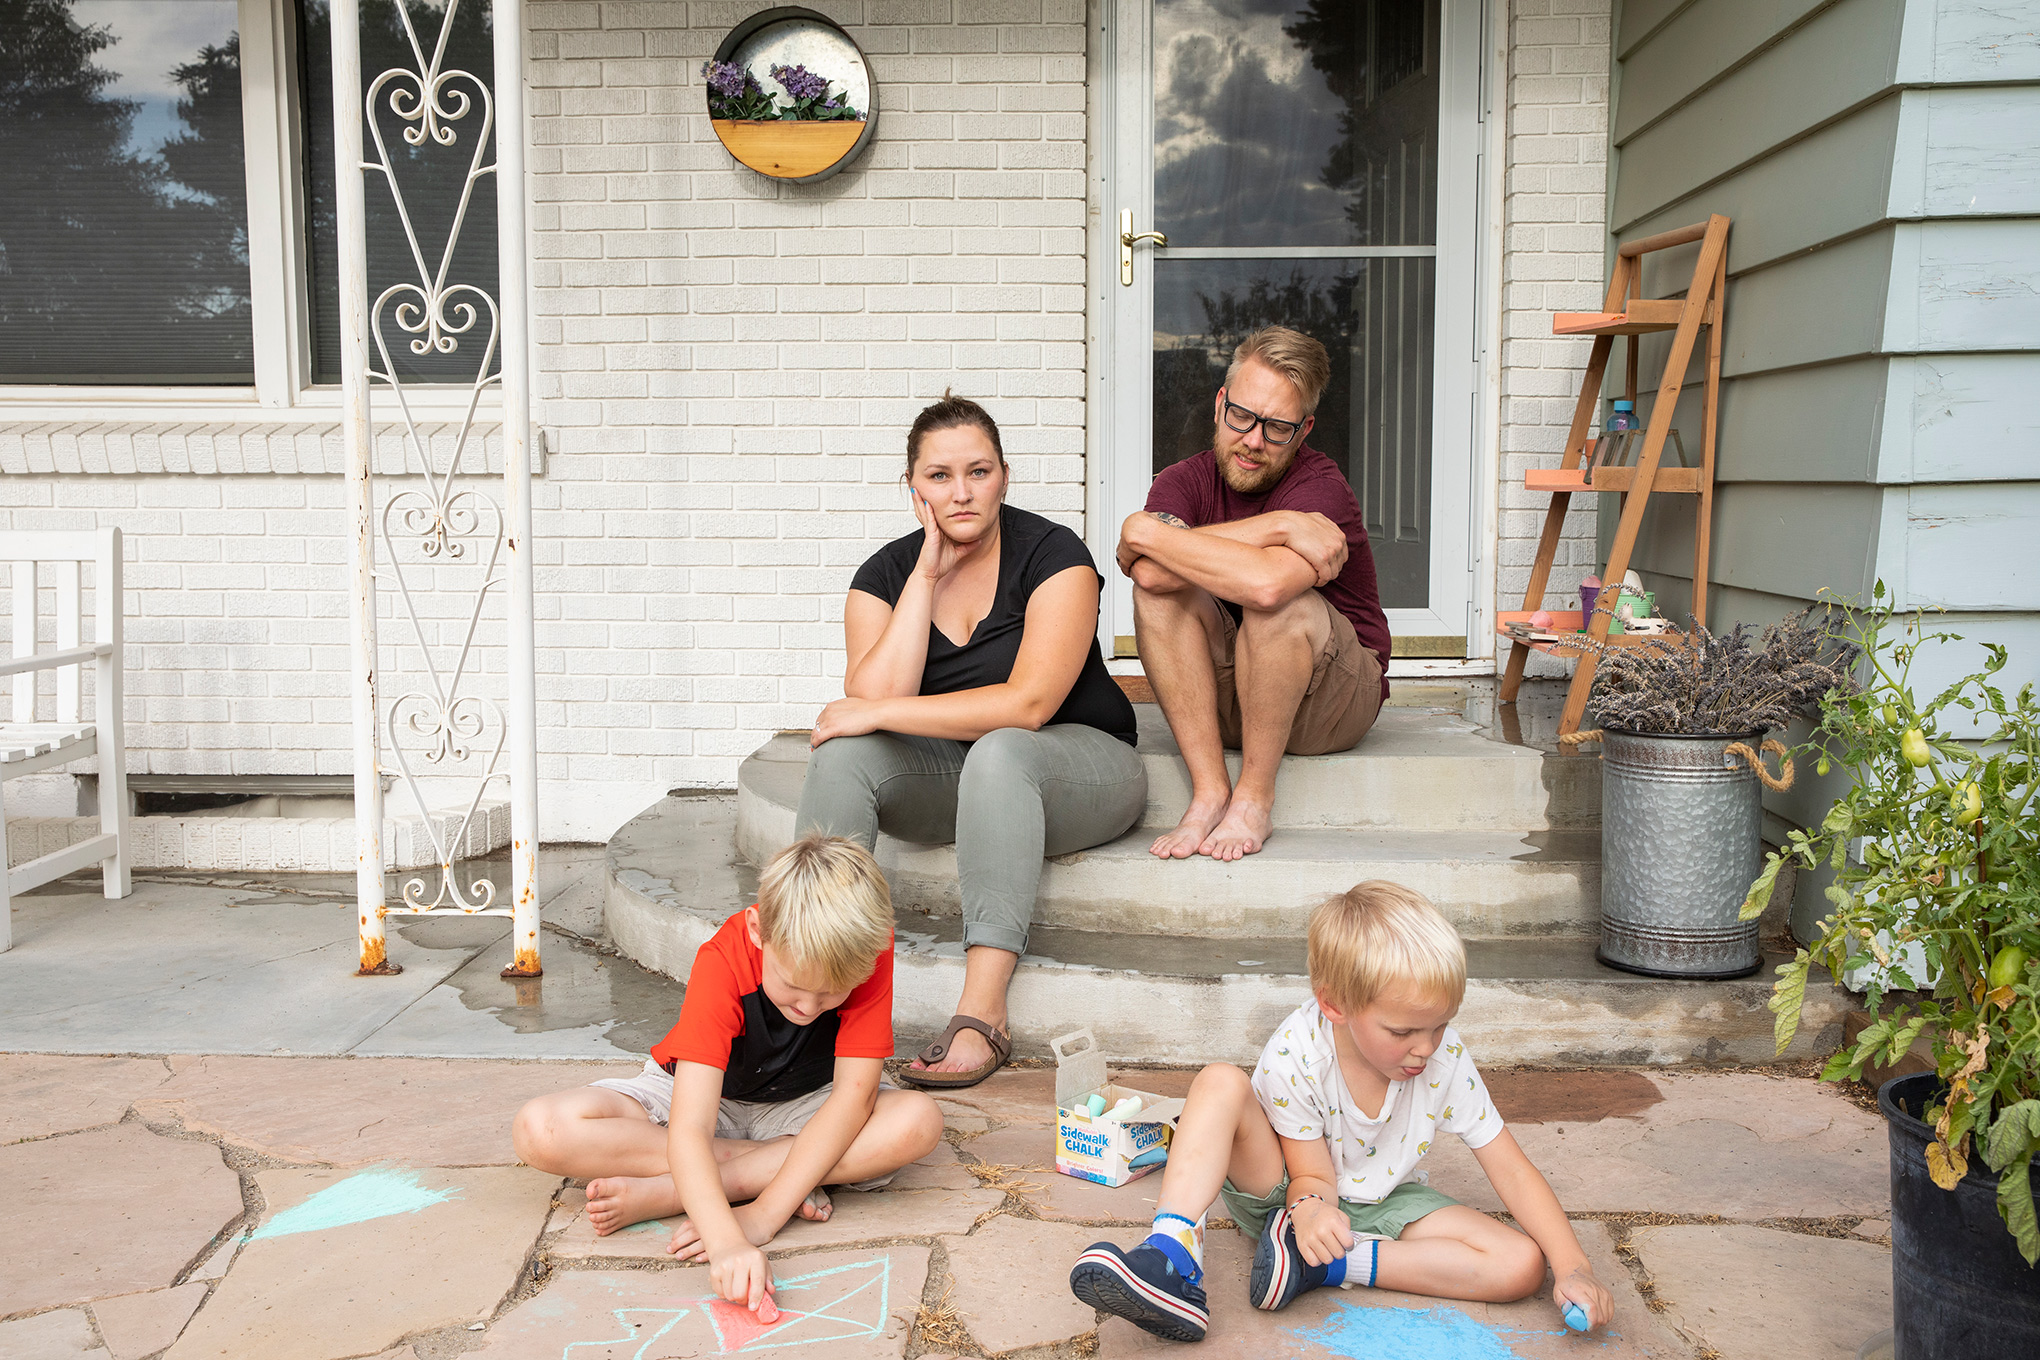 Kayla Brim with her family, outside their home in Caldwell, Idaho, on Aug. 11. Brim has been sick with COVID-19 since early July.